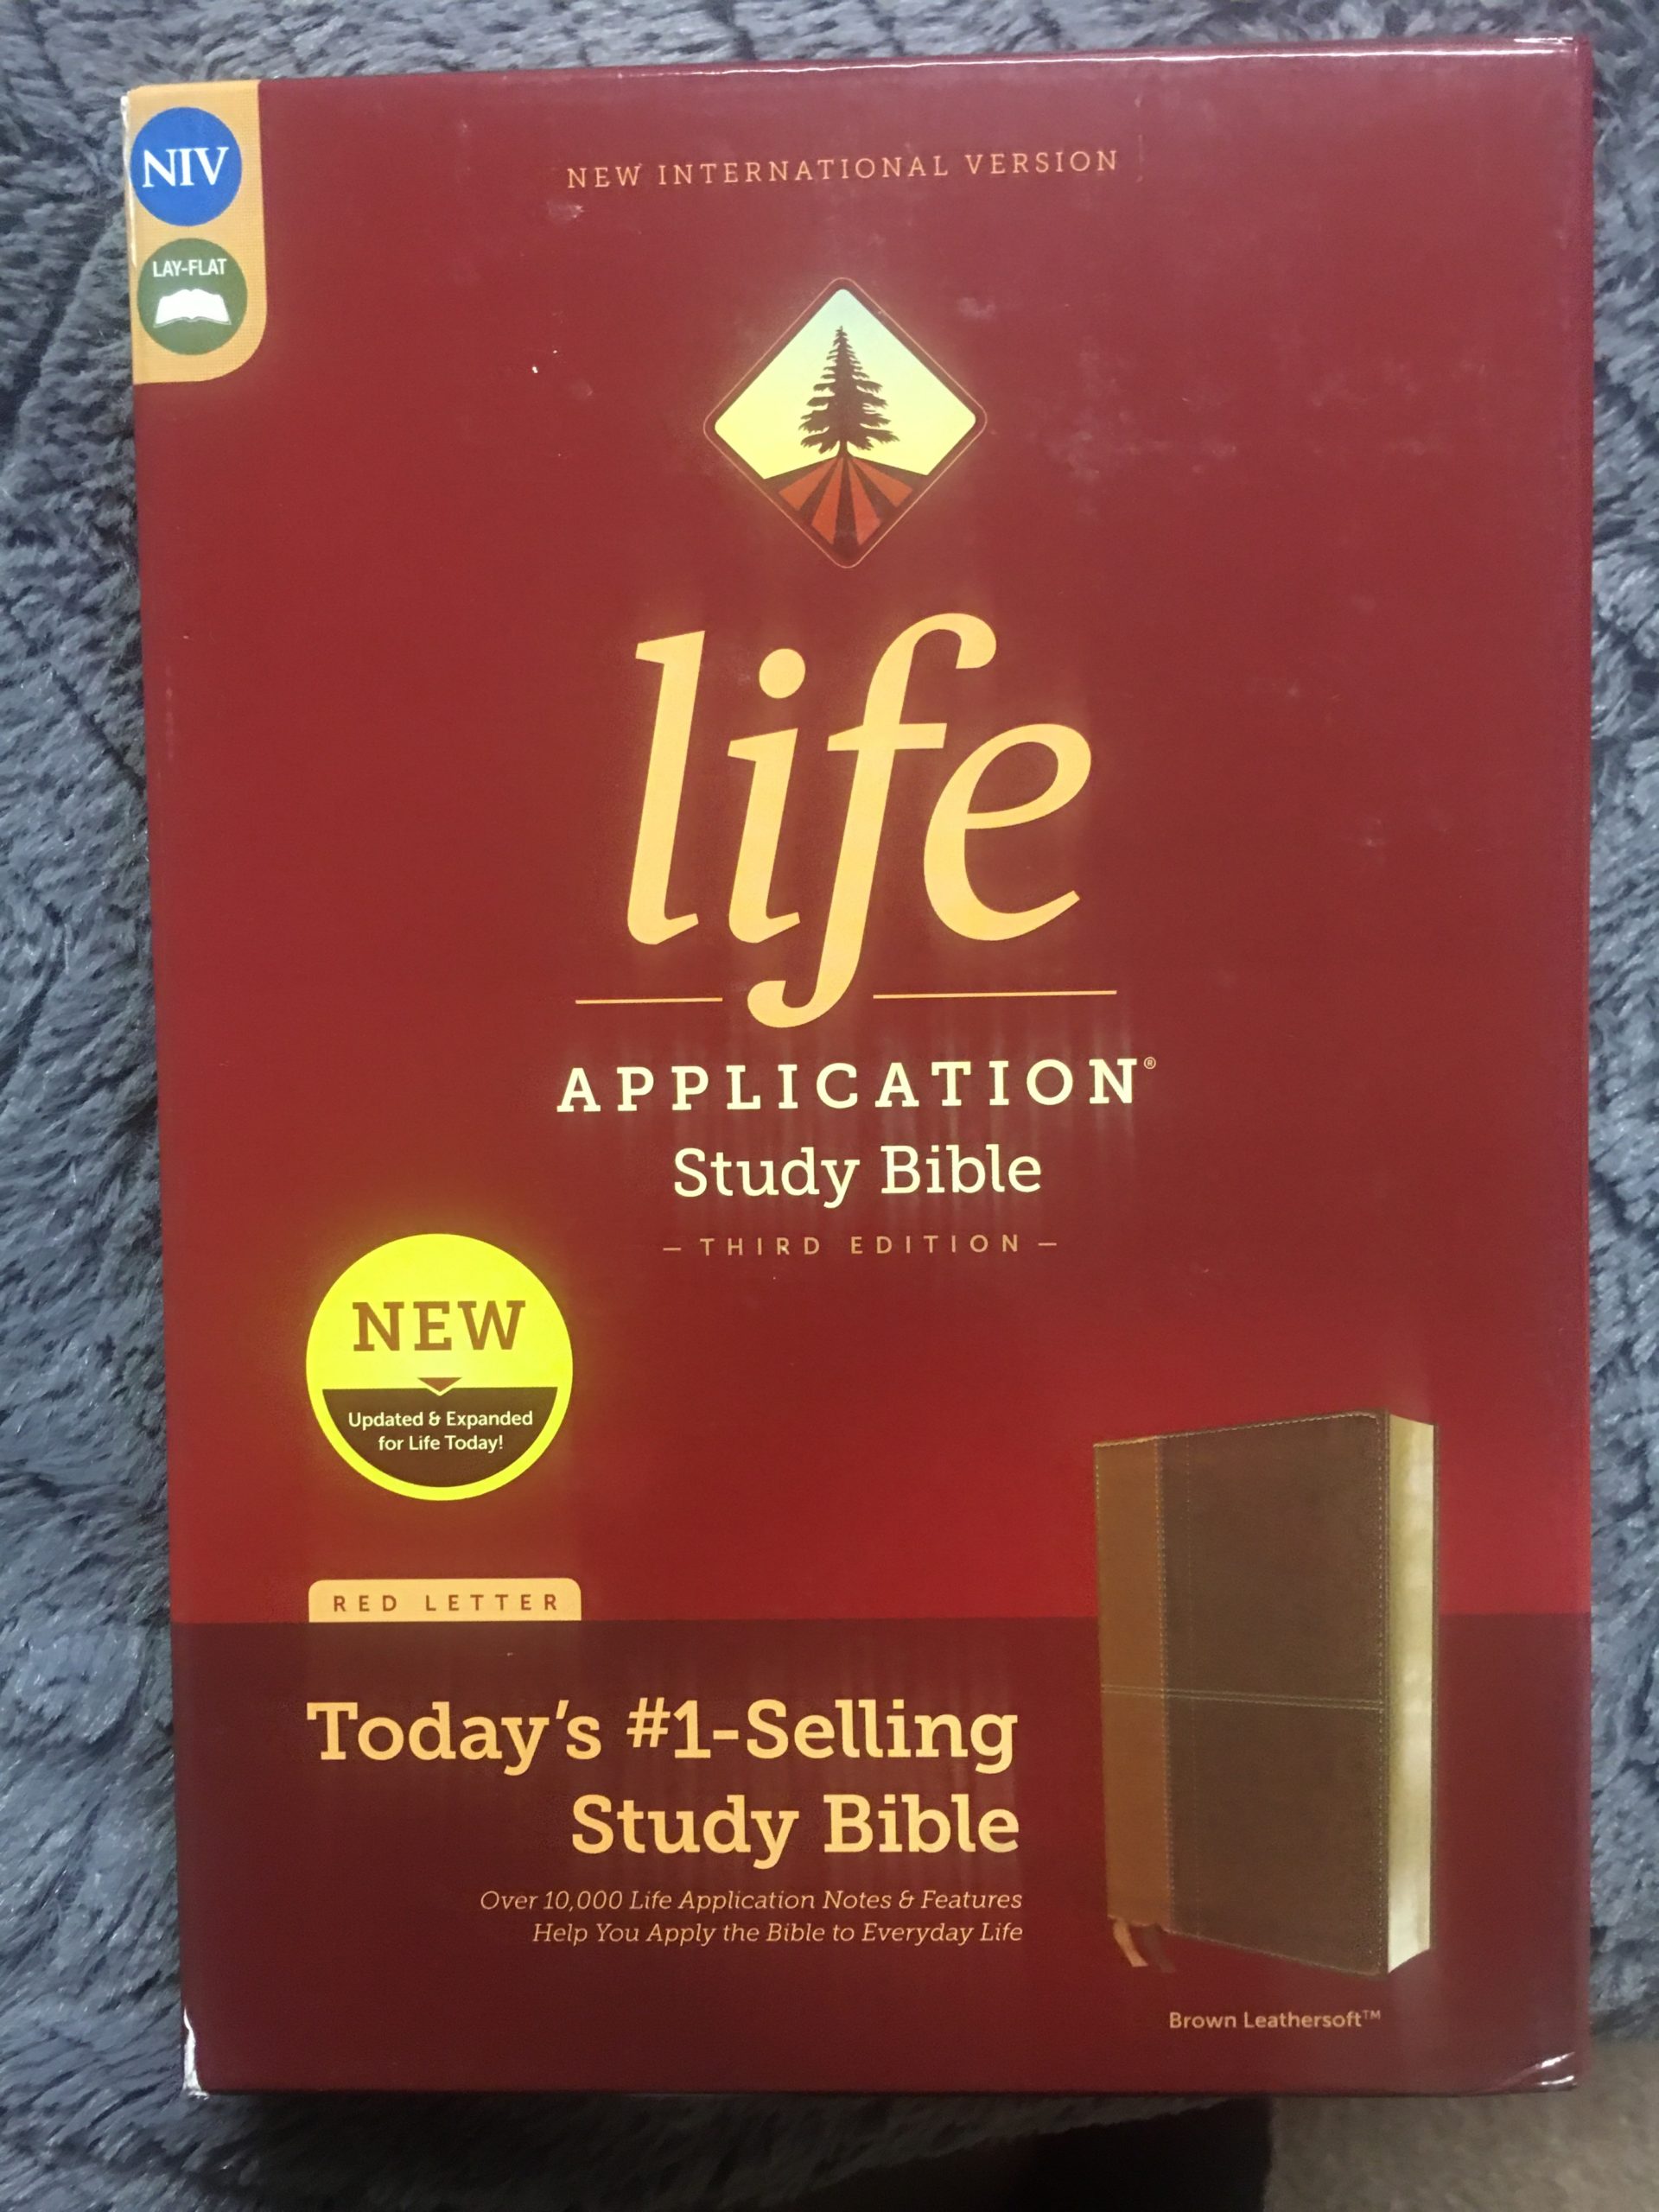 Life Application Study Bible Review - This is for the Third Edition in the New International Version (NIV). #BGBG2 #NIVBible